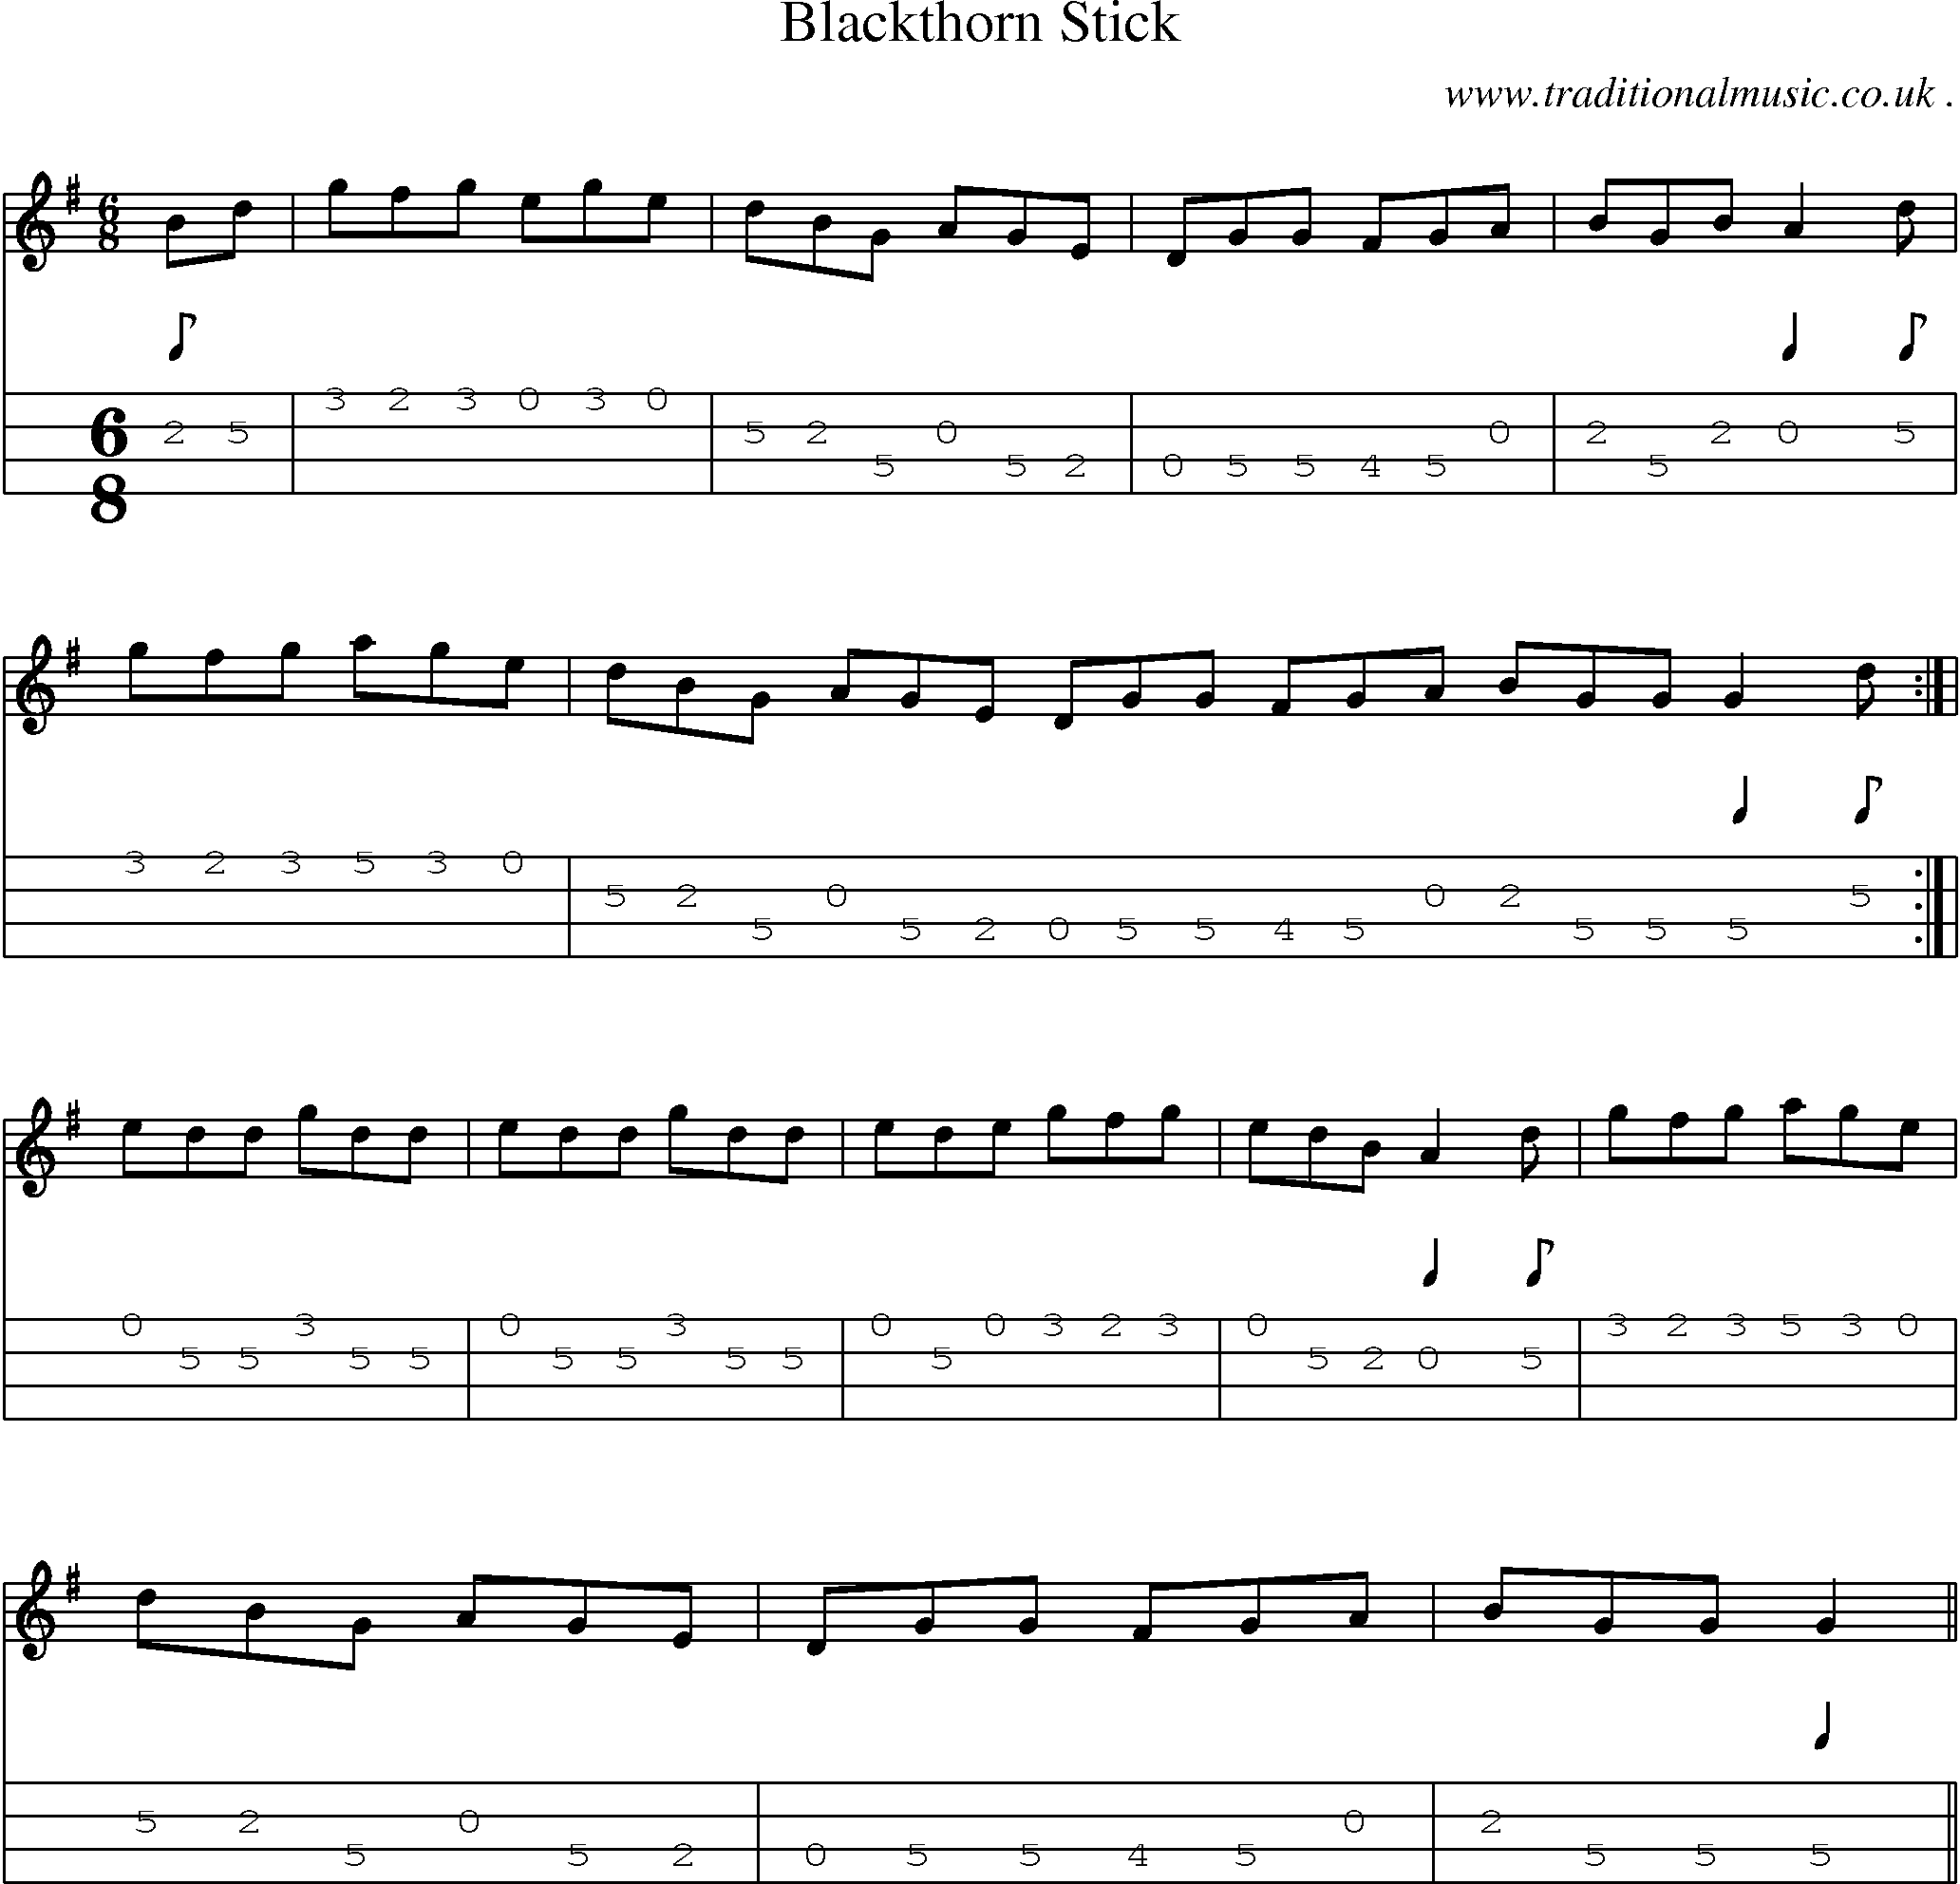 Sheet-Music and Mandolin Tabs for Blackthorn Stick